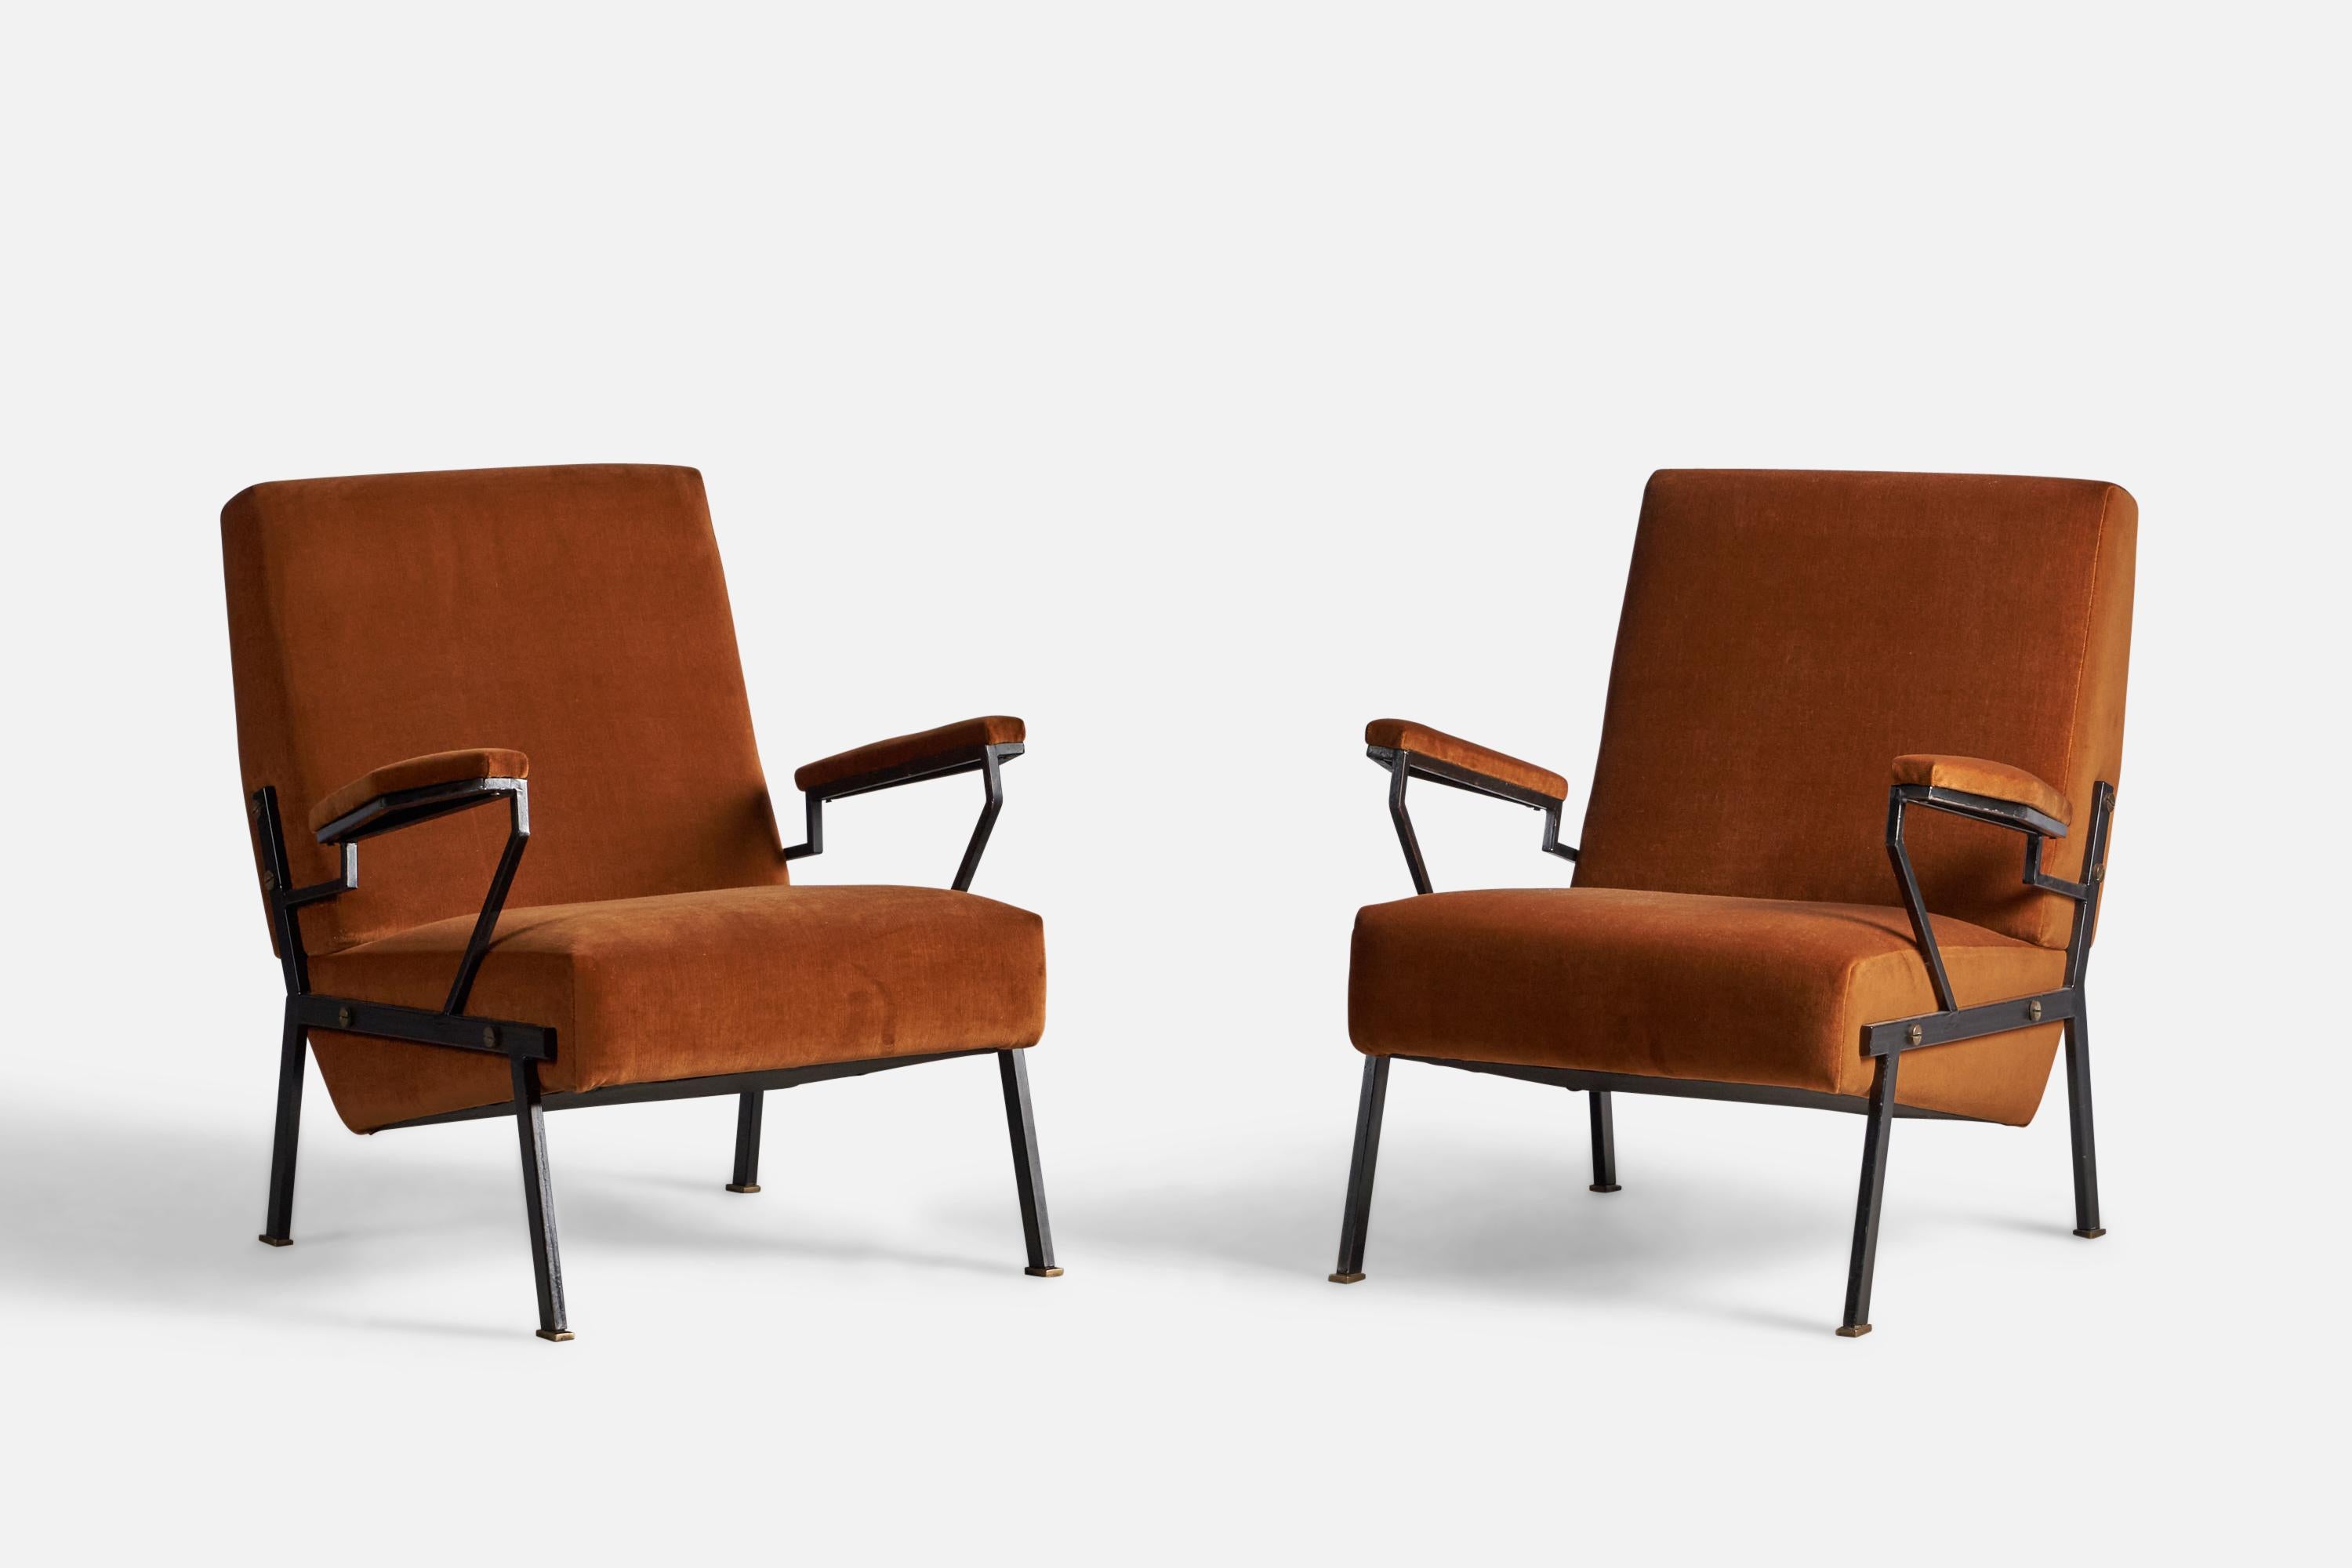 A pair of black-painted iron and orange brown velvet lounge chairs, designed and produced in Italy, 1940s.

15